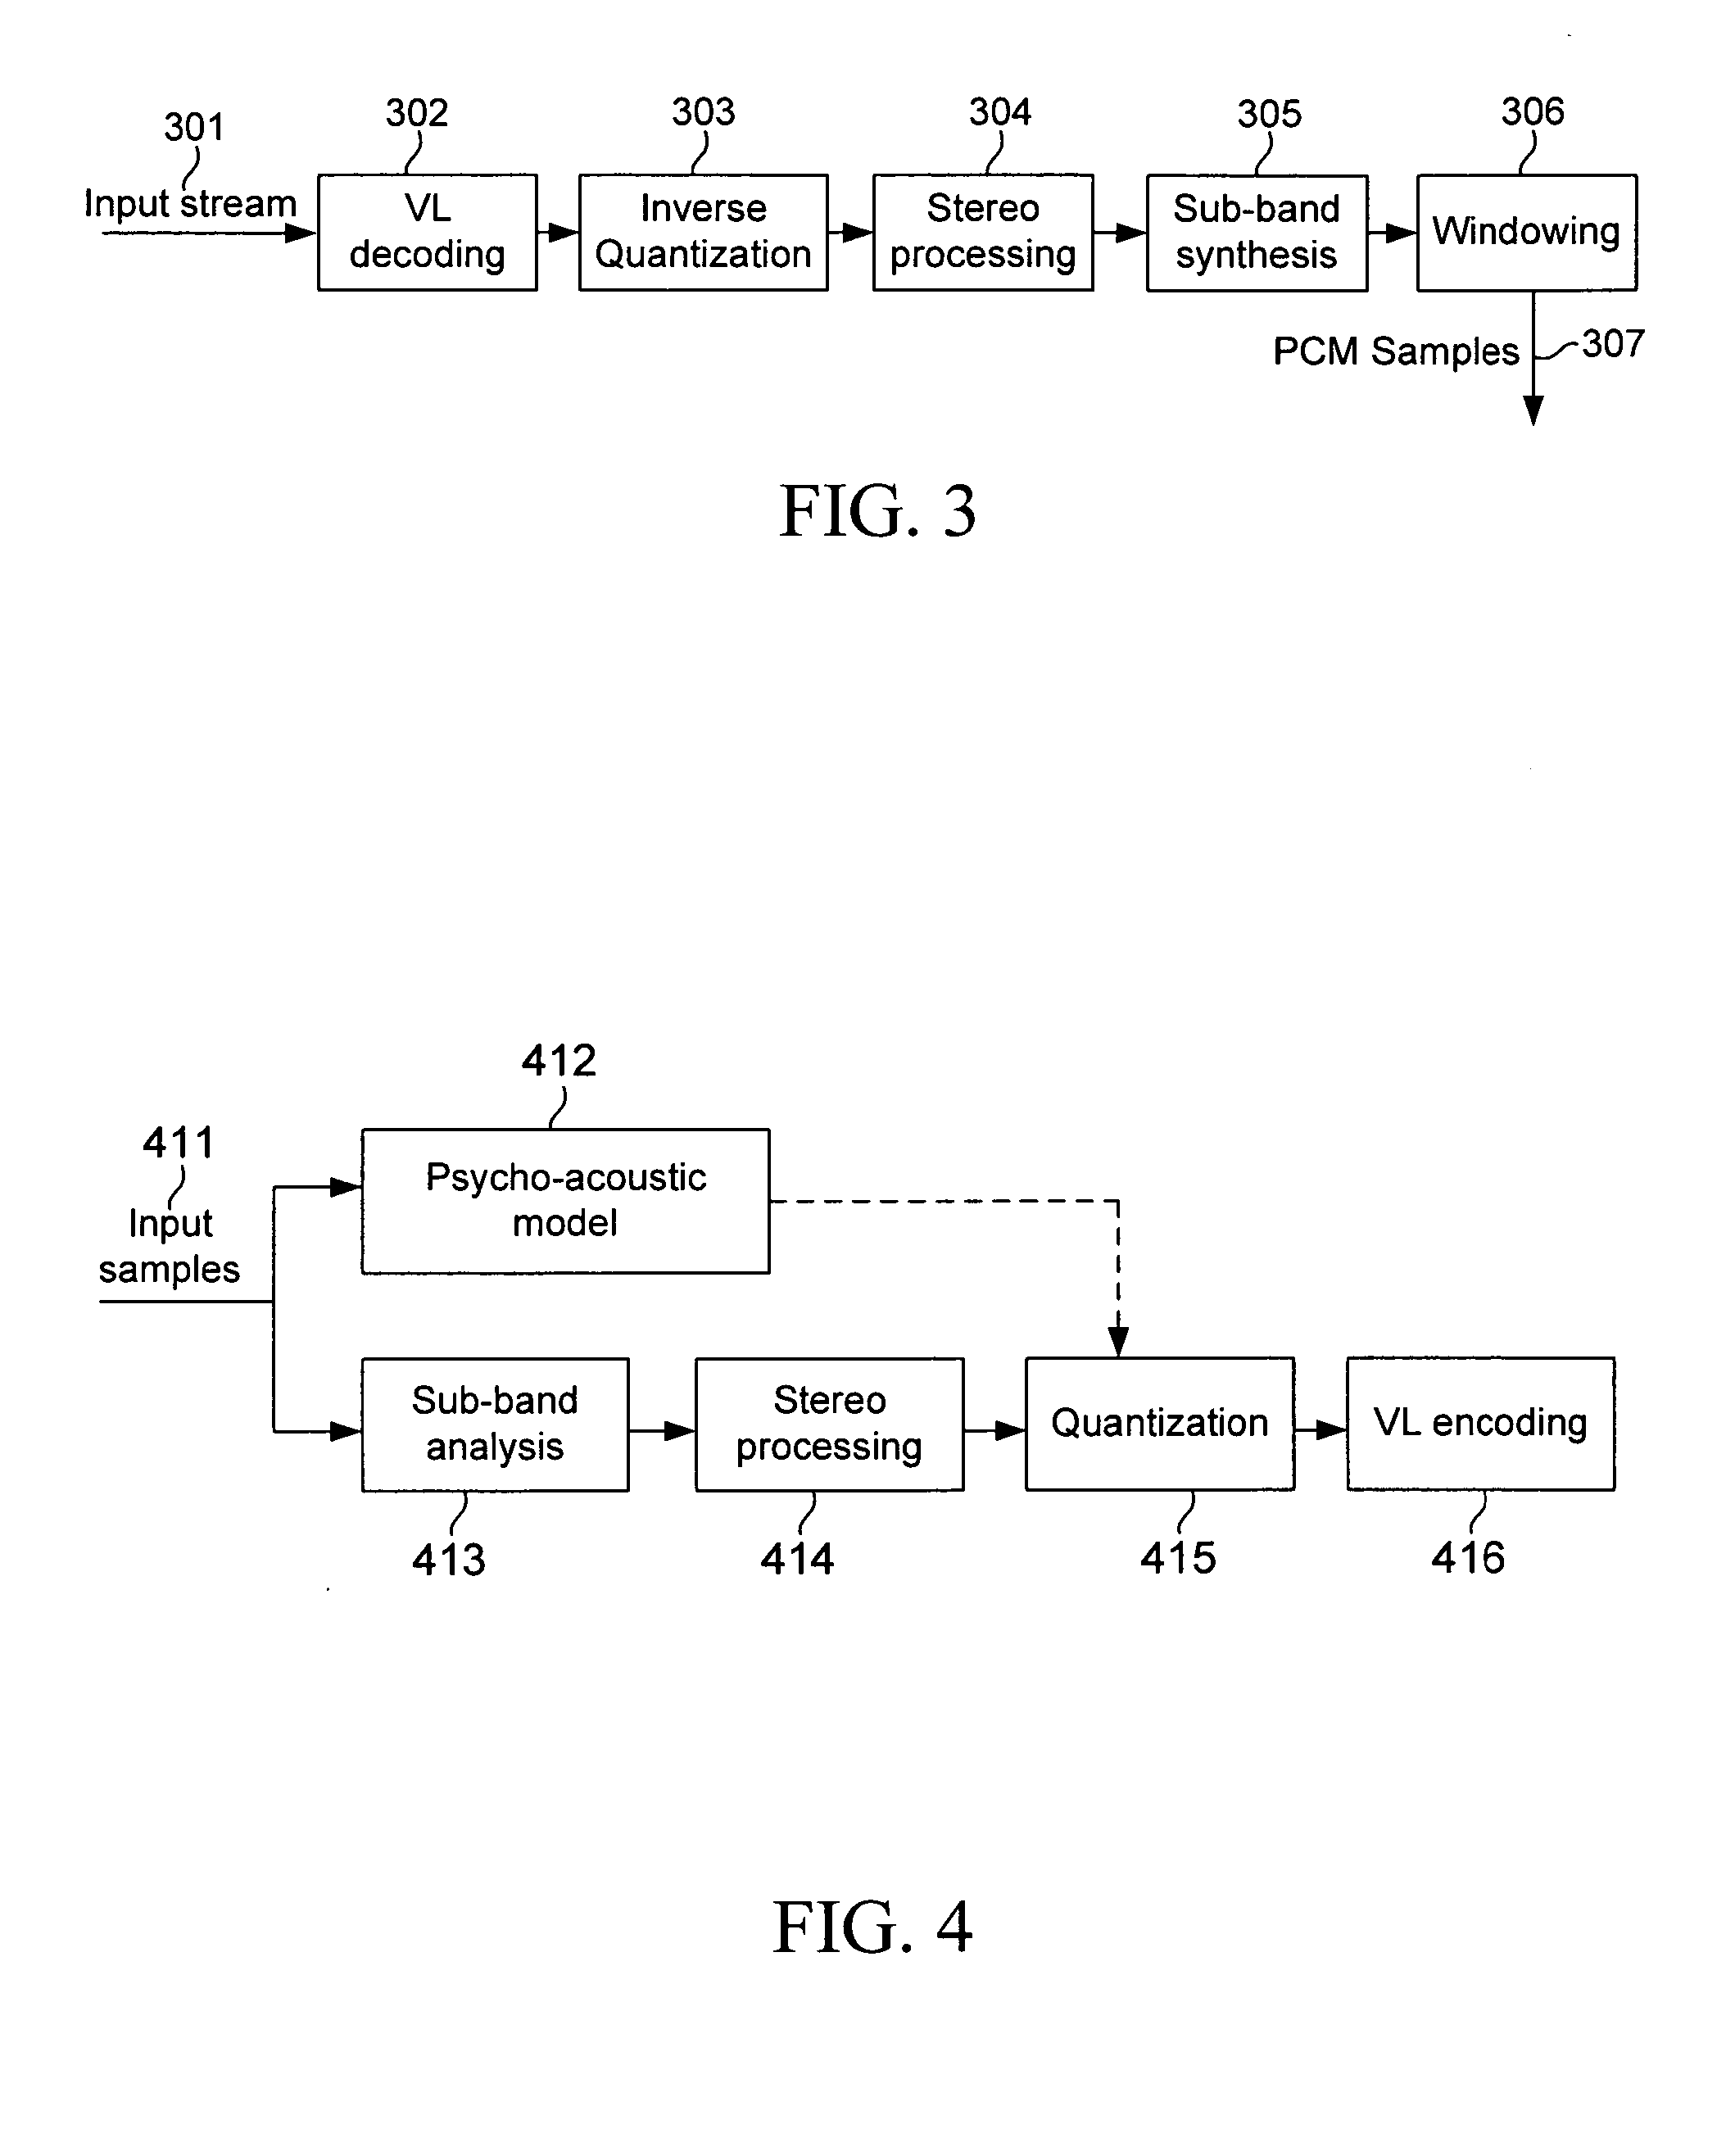 Multi-threaded processing design in architecture with multiple co-processors